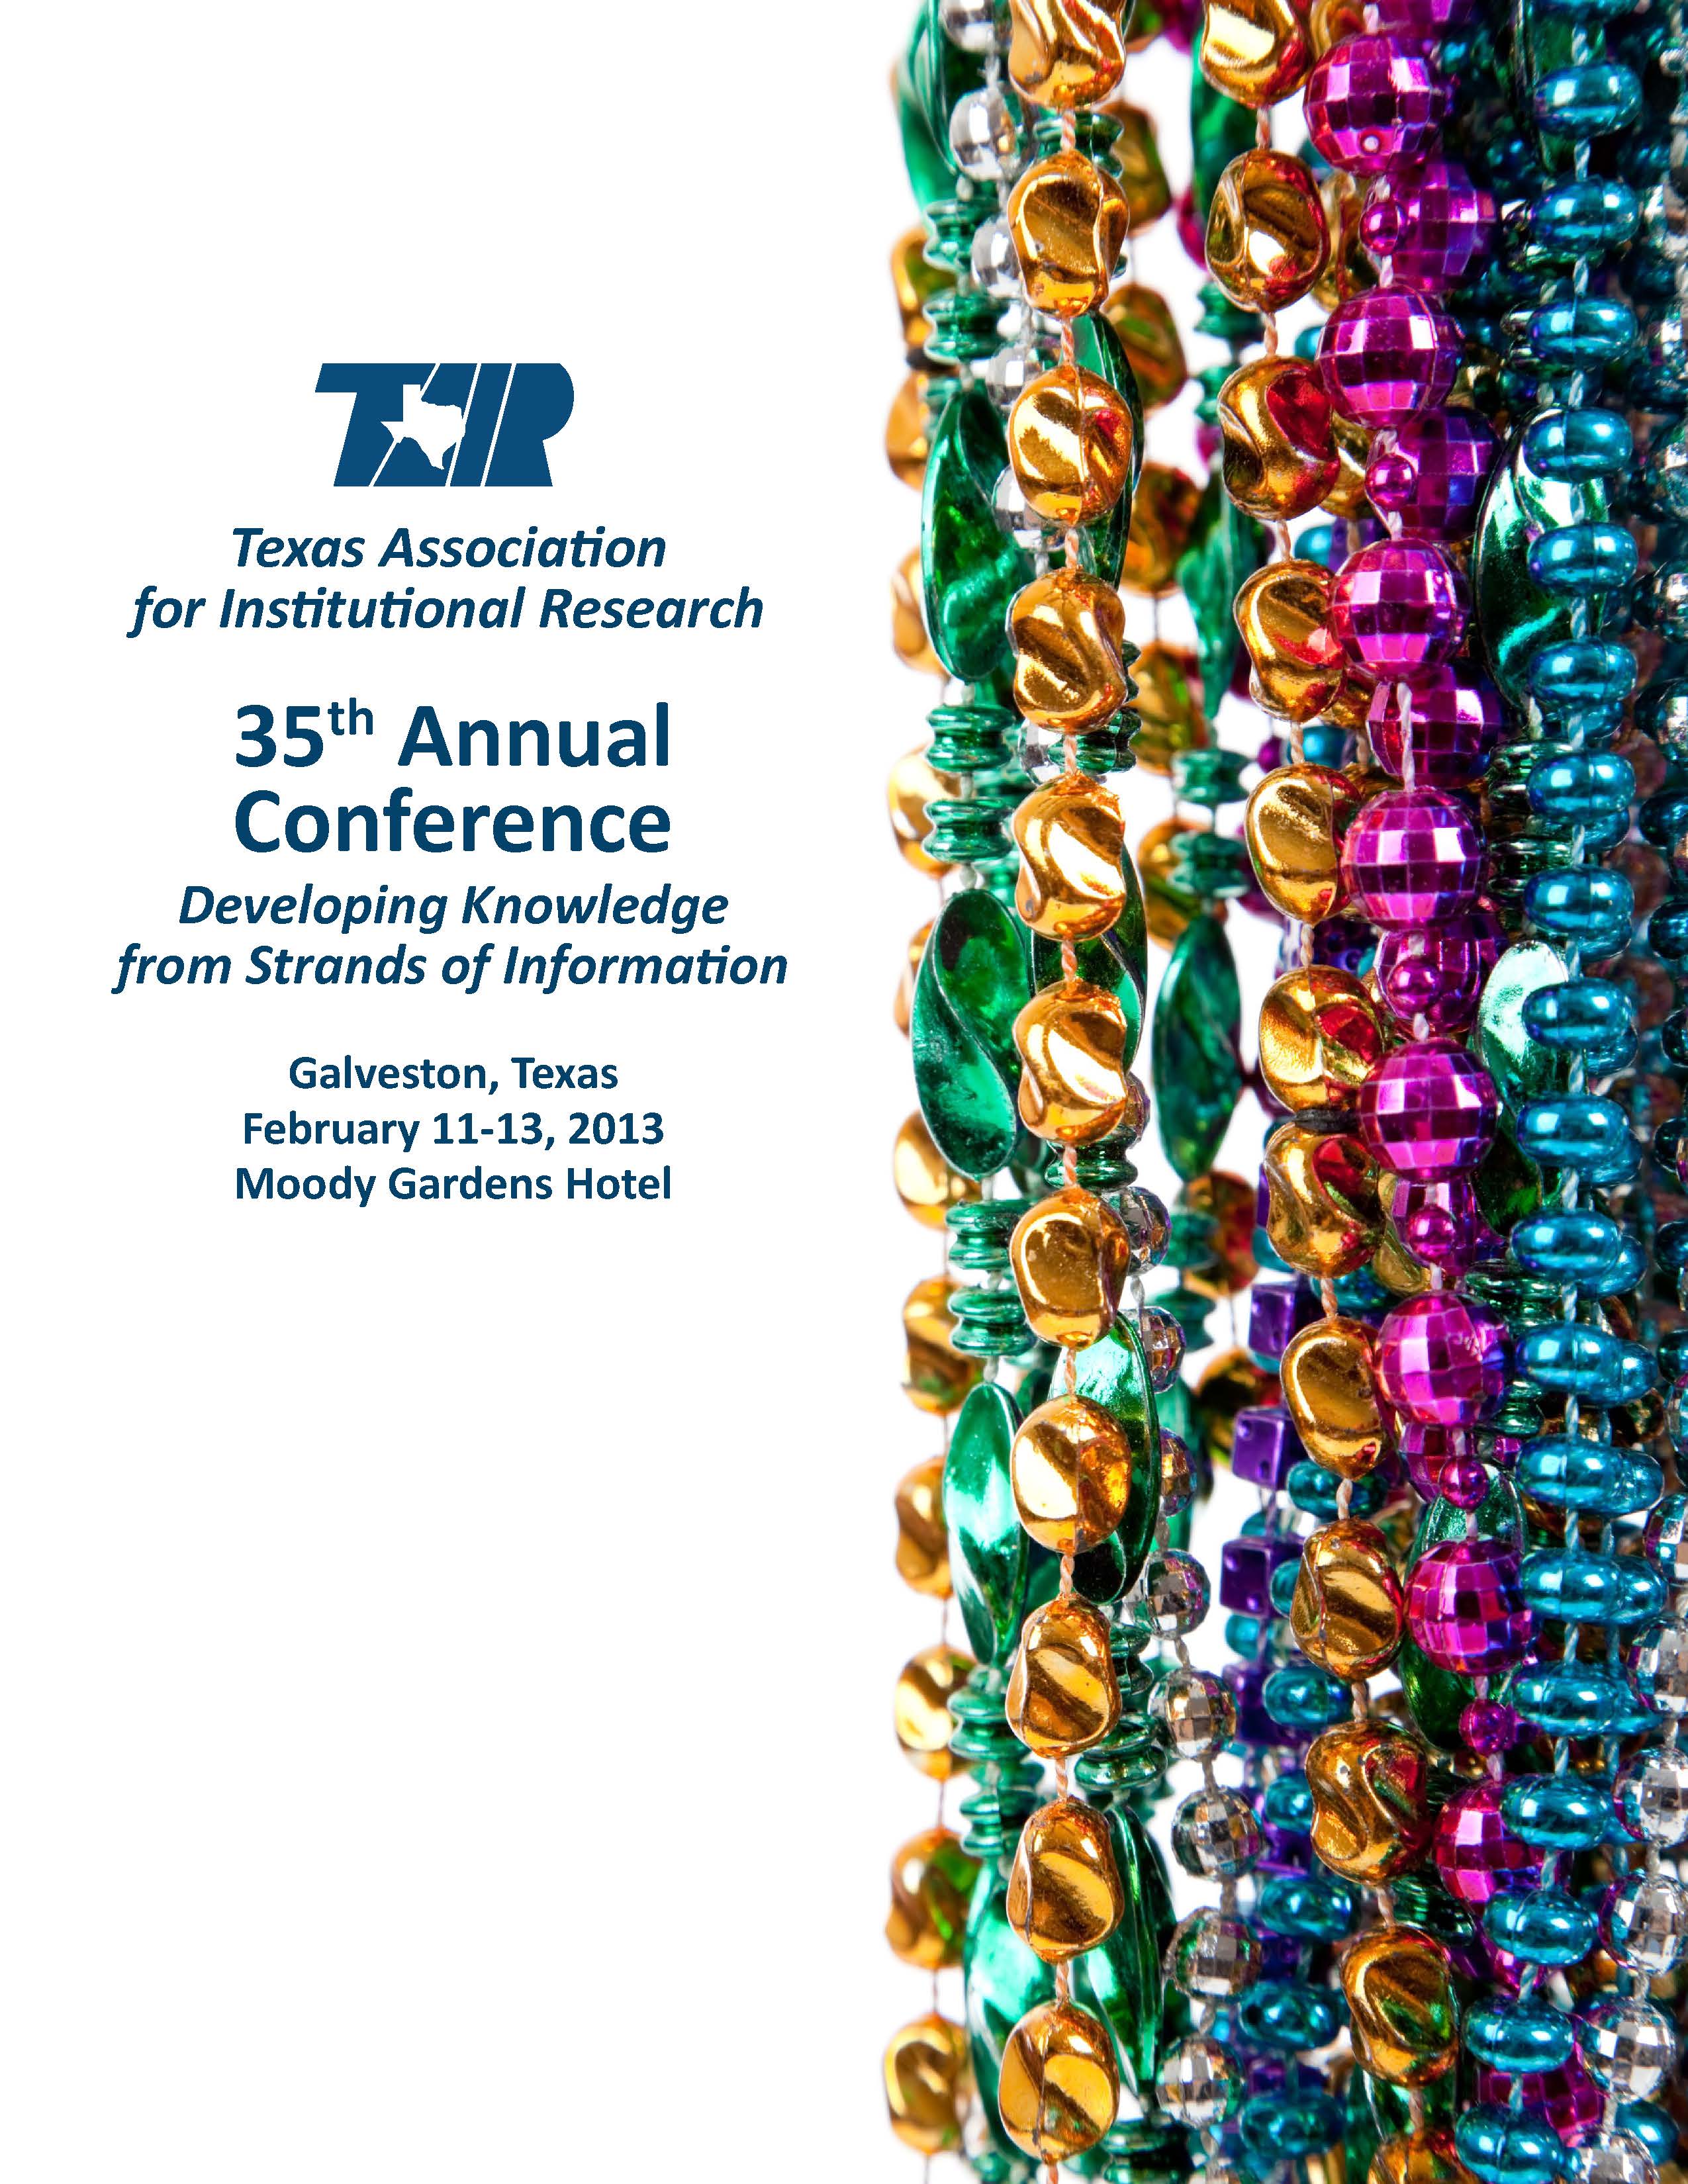 TAIR 2013 conference flyer image